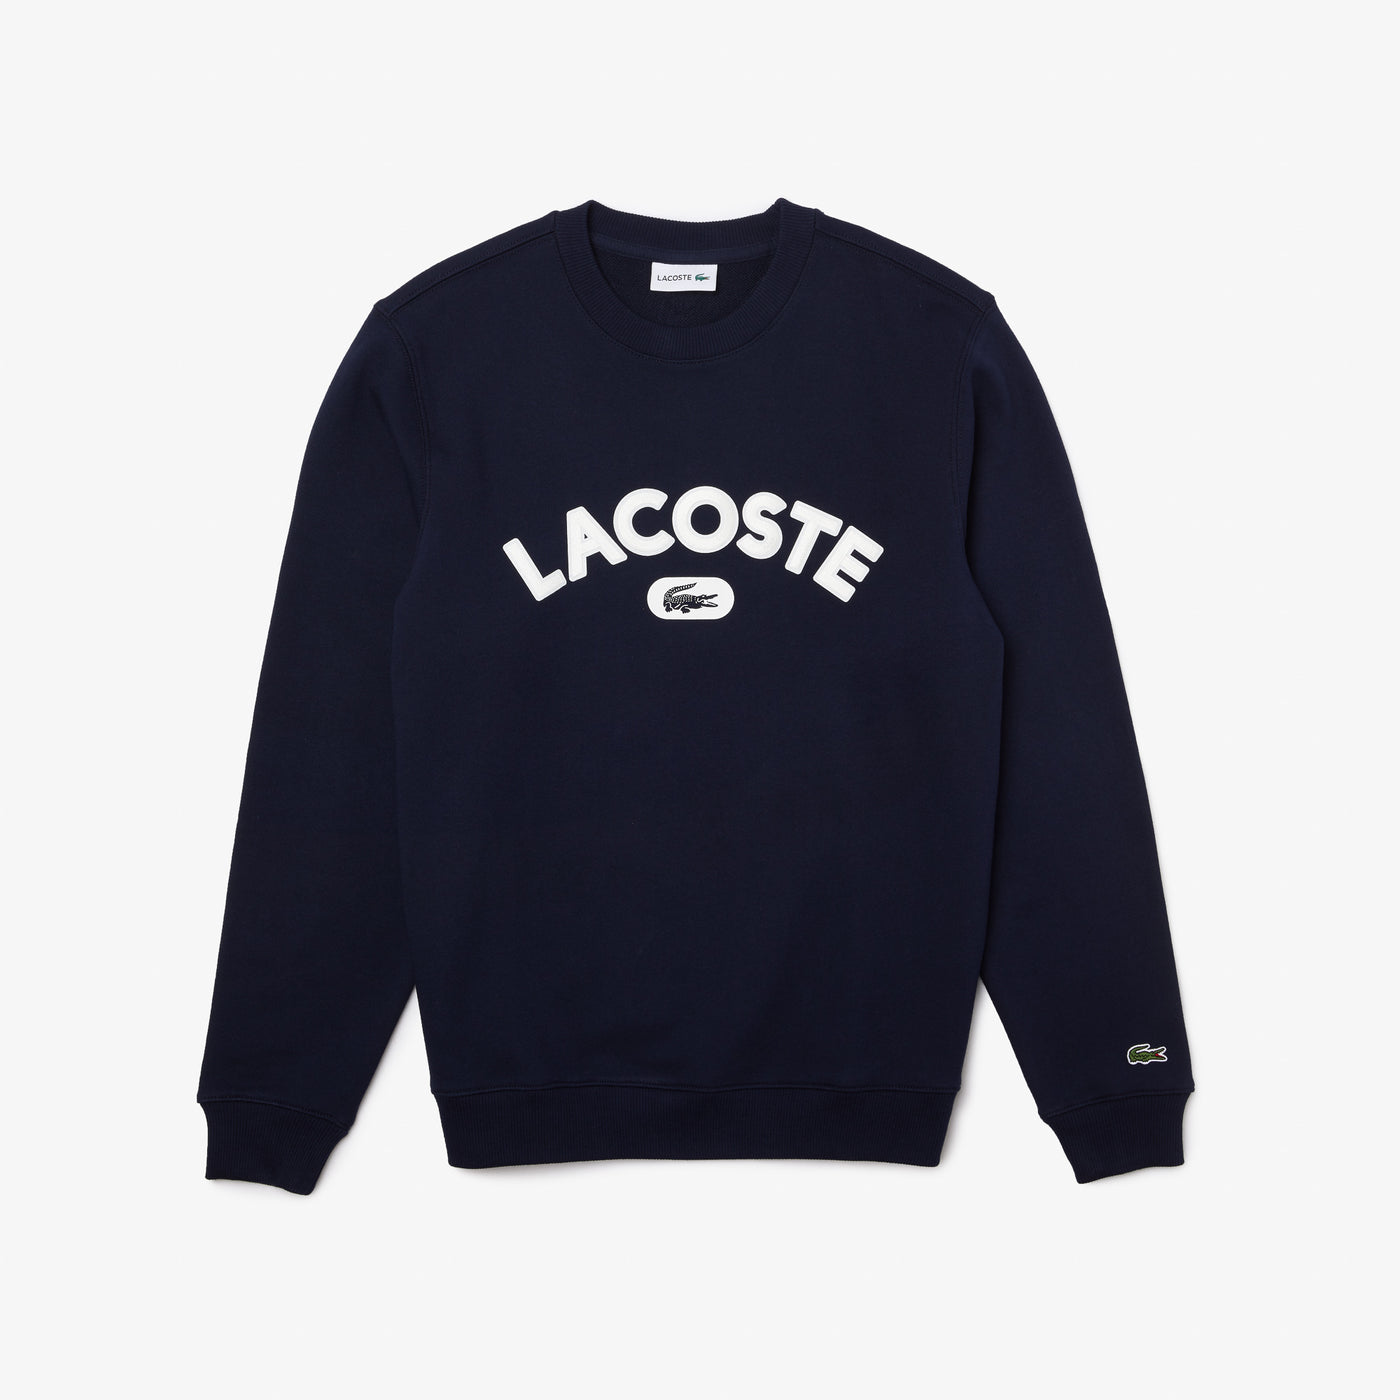 Shop The Latest Collection Of Outlet - Lacoste Men’S Crew Neck Branded Terry Sweatshirt - Sh6873 In Lebanon